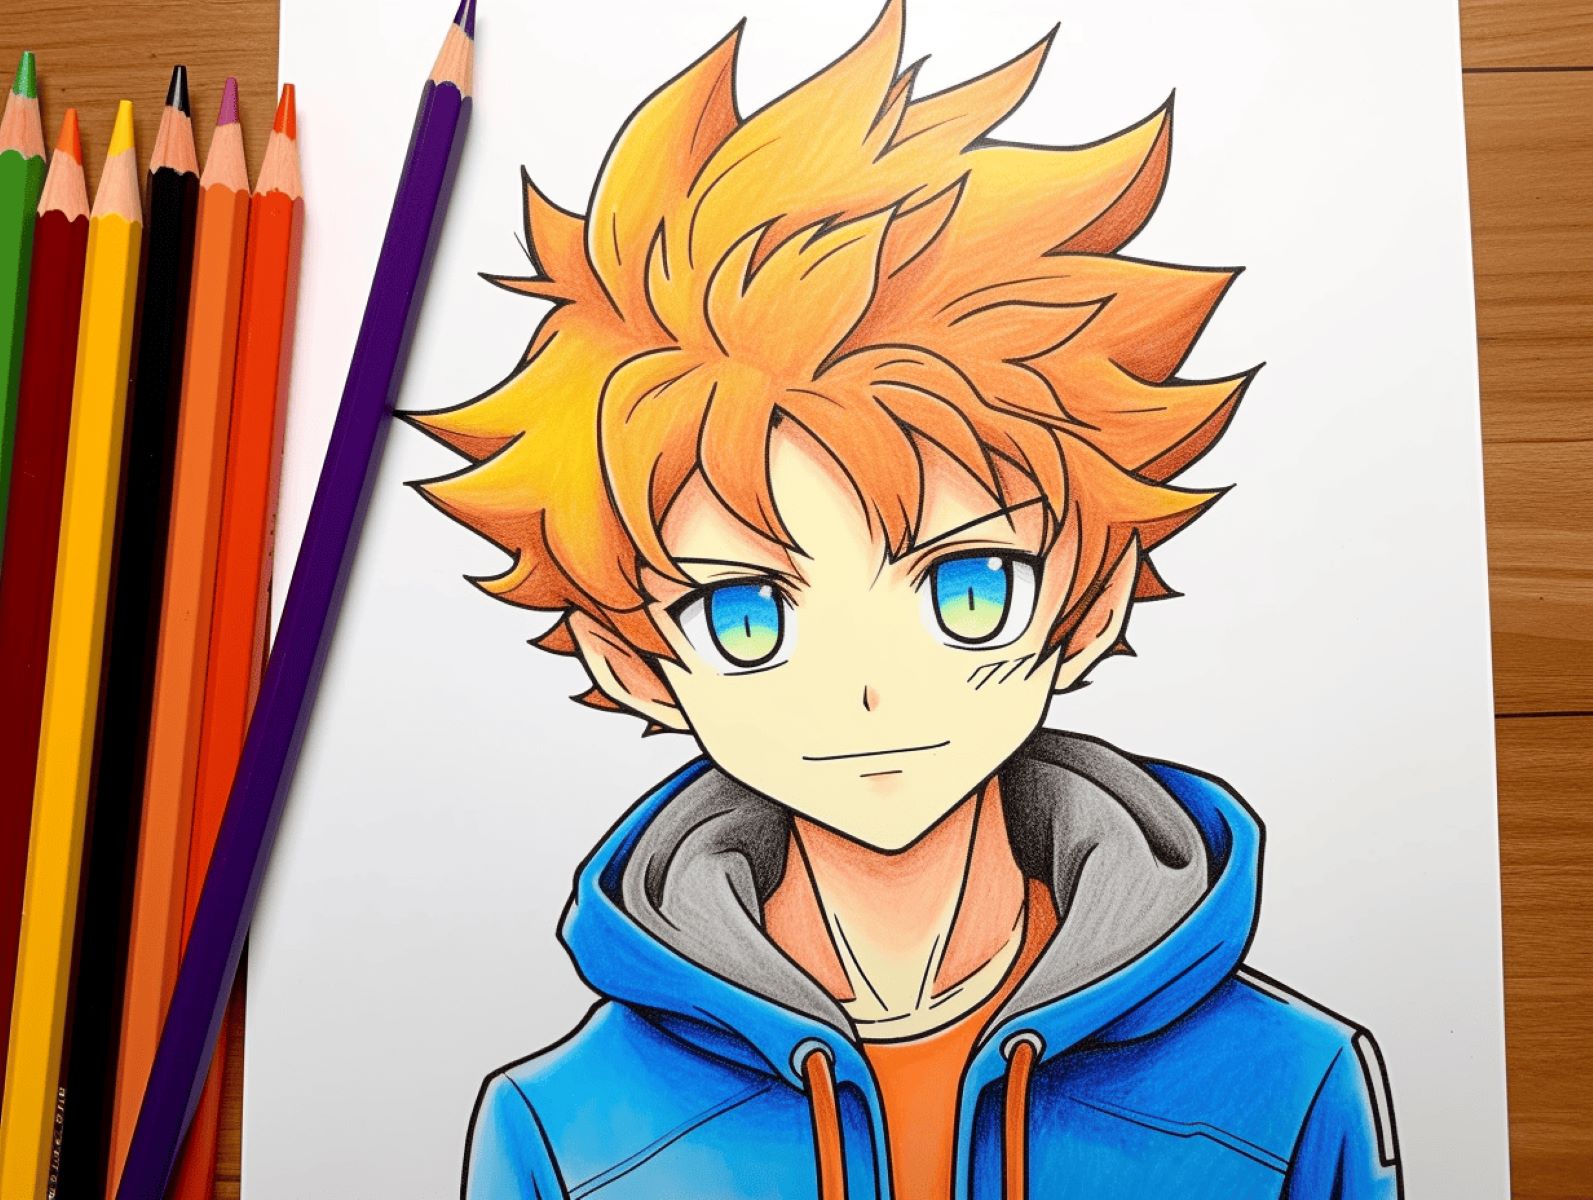 Master The Art Of Drawing In Anime Style With These Simple Tips!